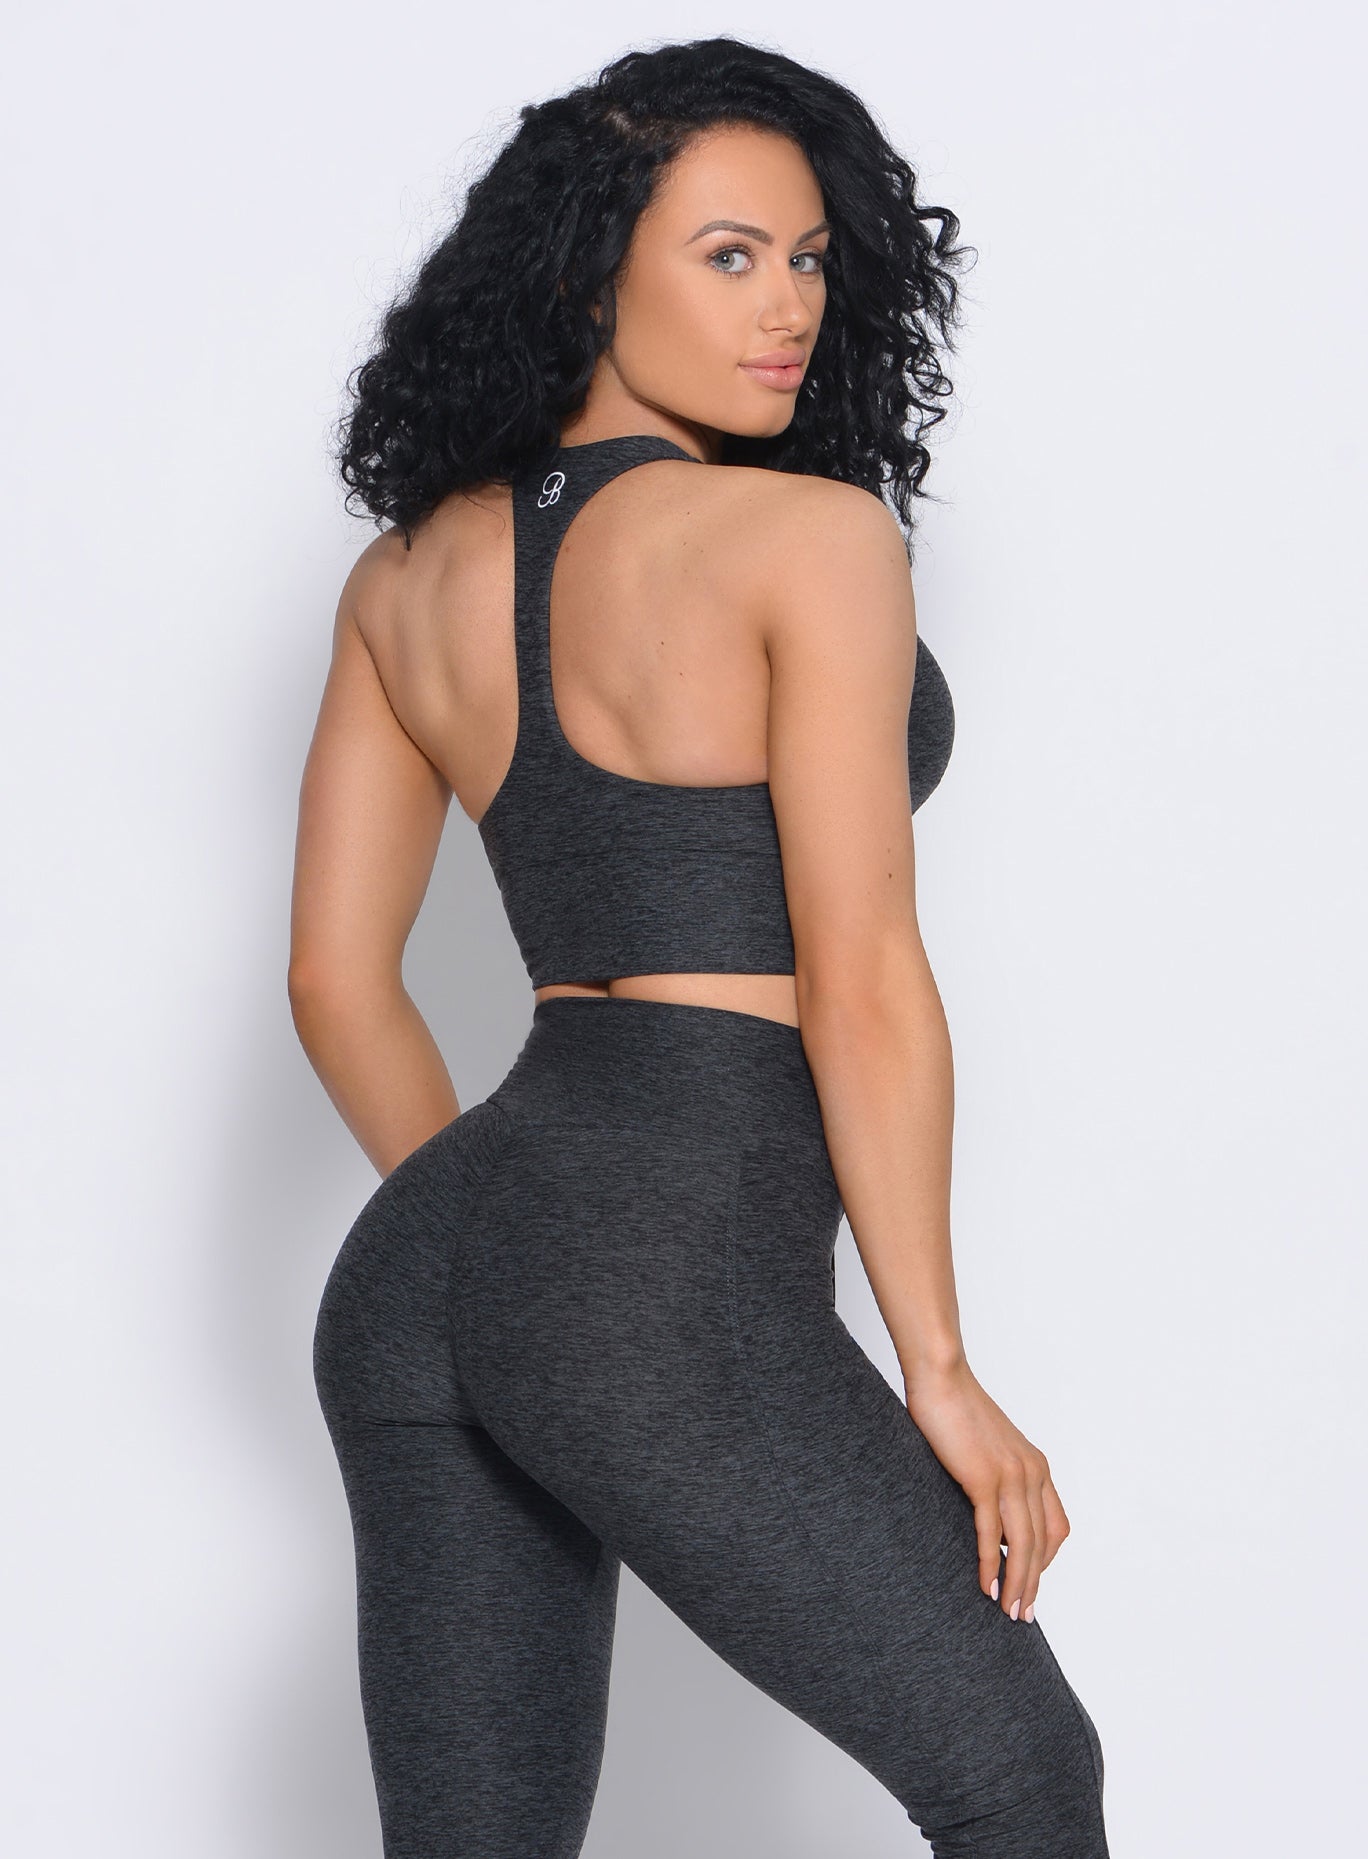 Back view of the model wearing our edgy longline bra in charcoal color and a matching leggings